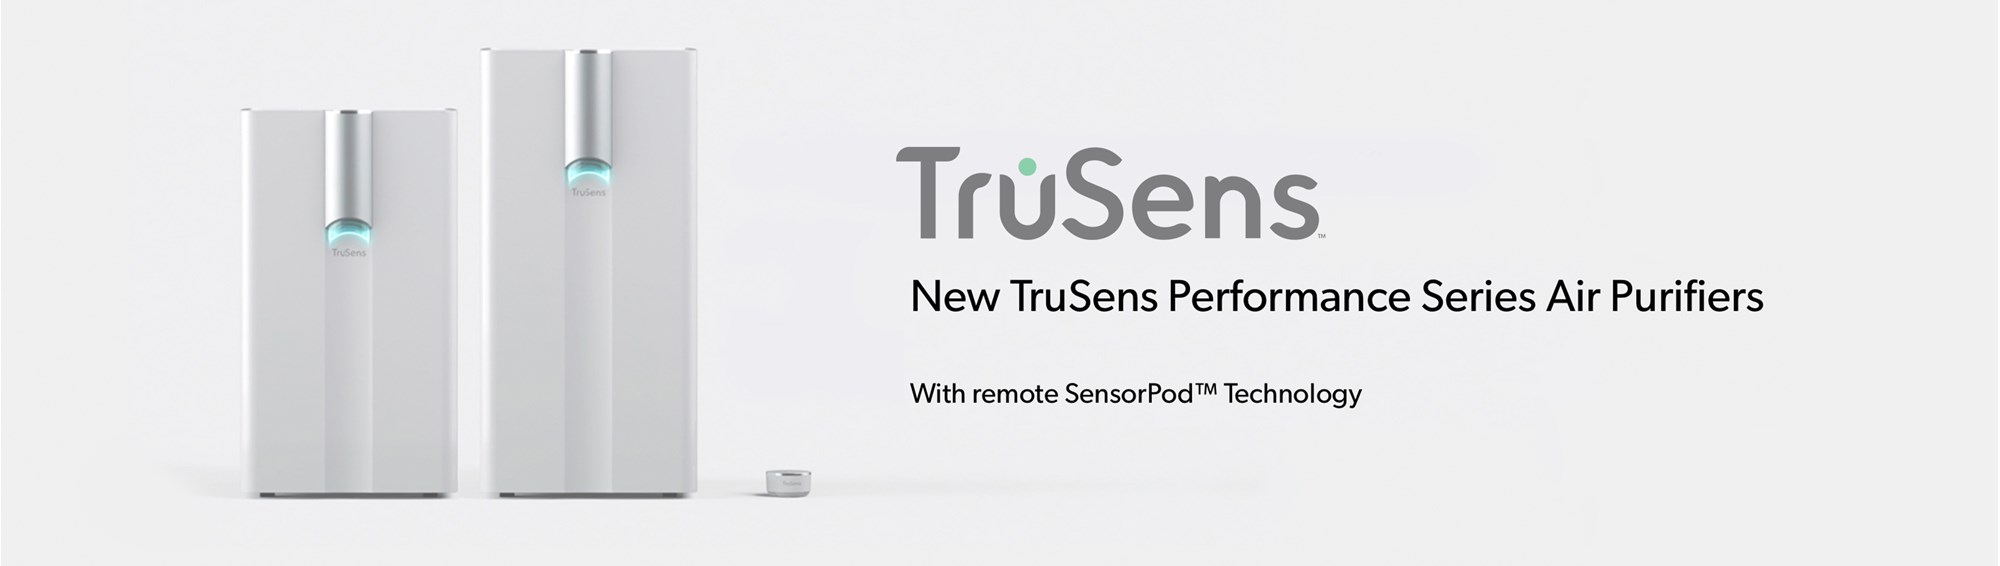 New TruSens Performance Series Air Purifiers. With remote SensorPod™ Technology by TruSens